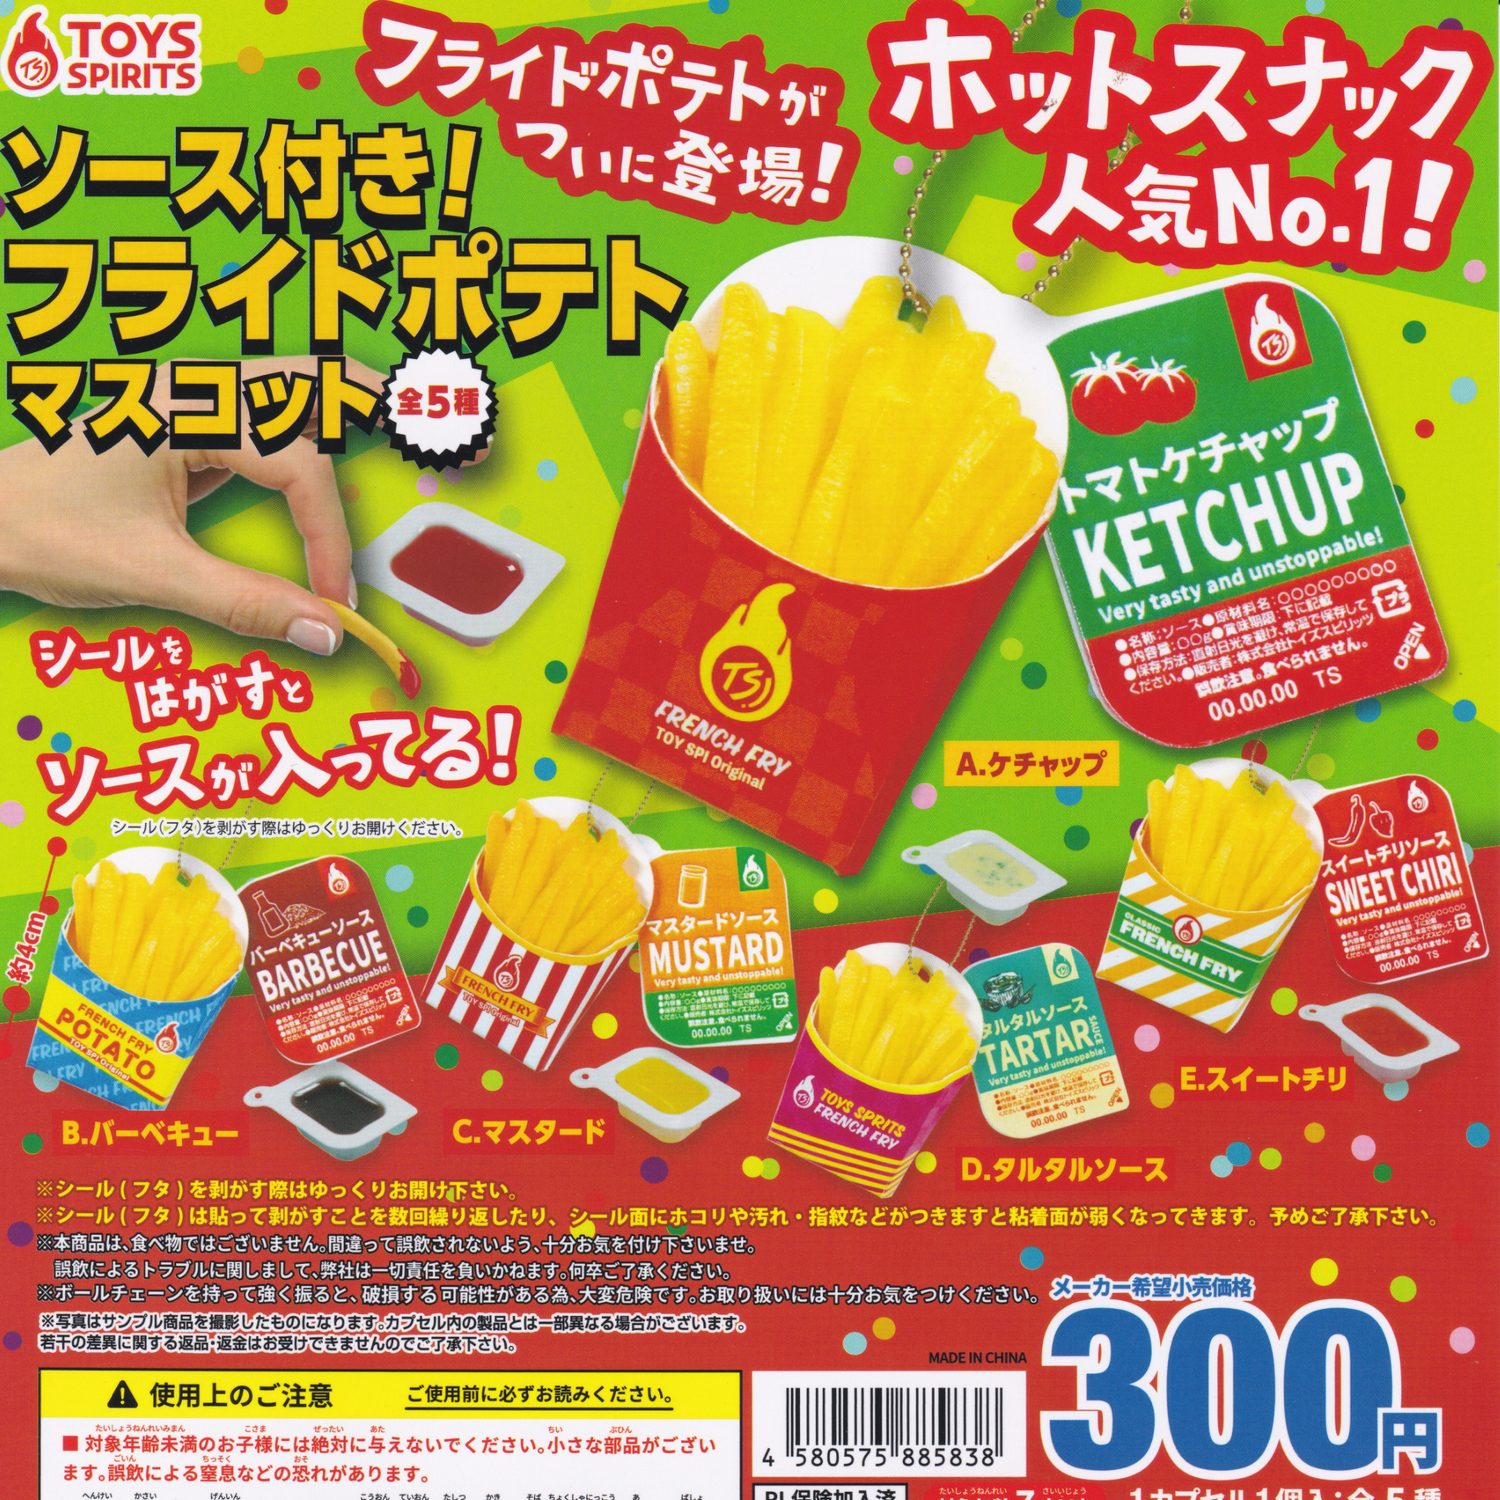 A Japanese flyer showing the 5 toy French fry and sauce keychains in this collection.